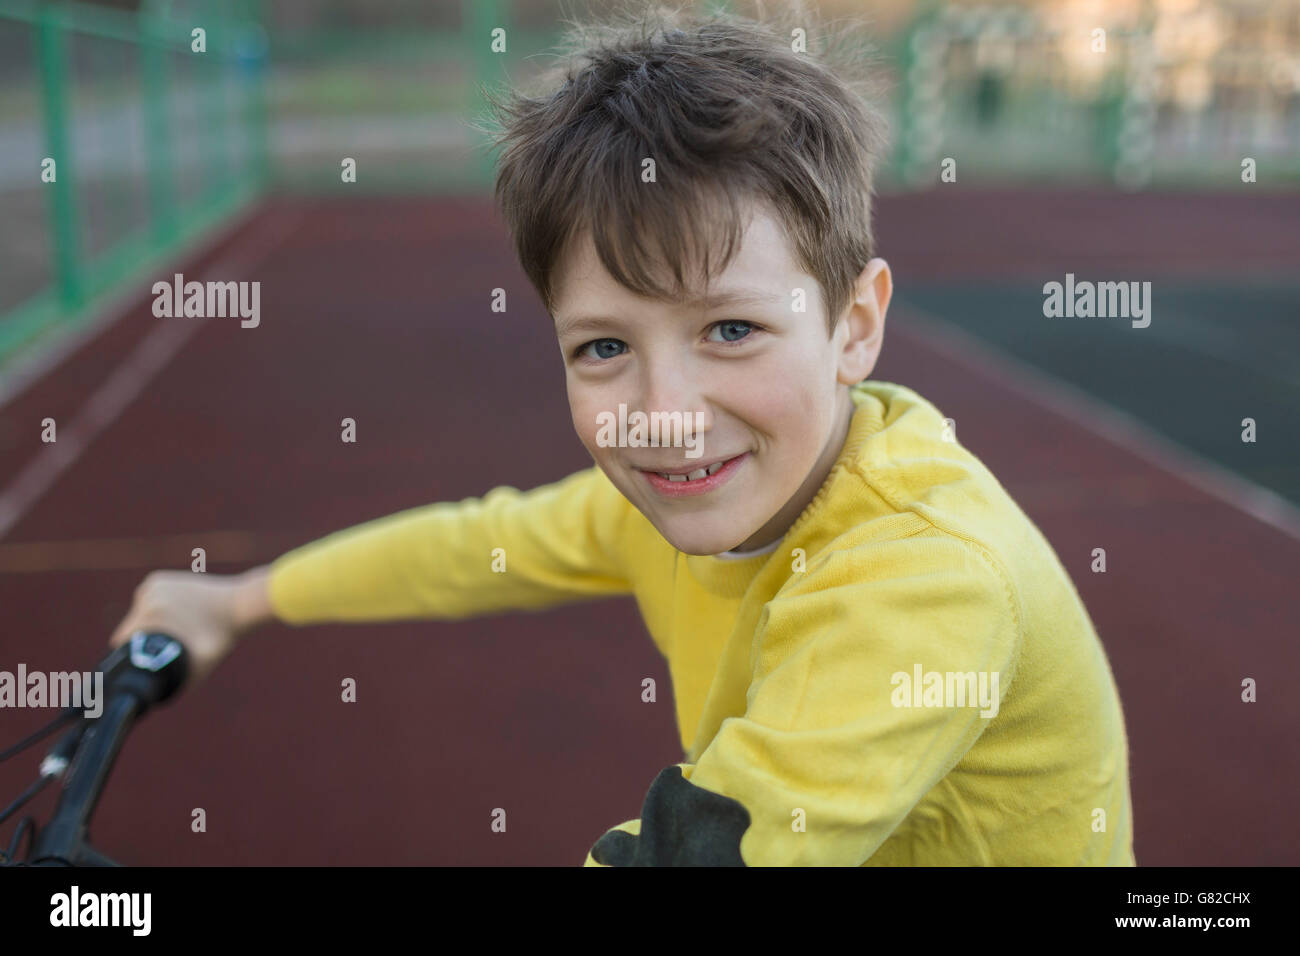 Portrait of smiling boy cycling in court Stock Photo